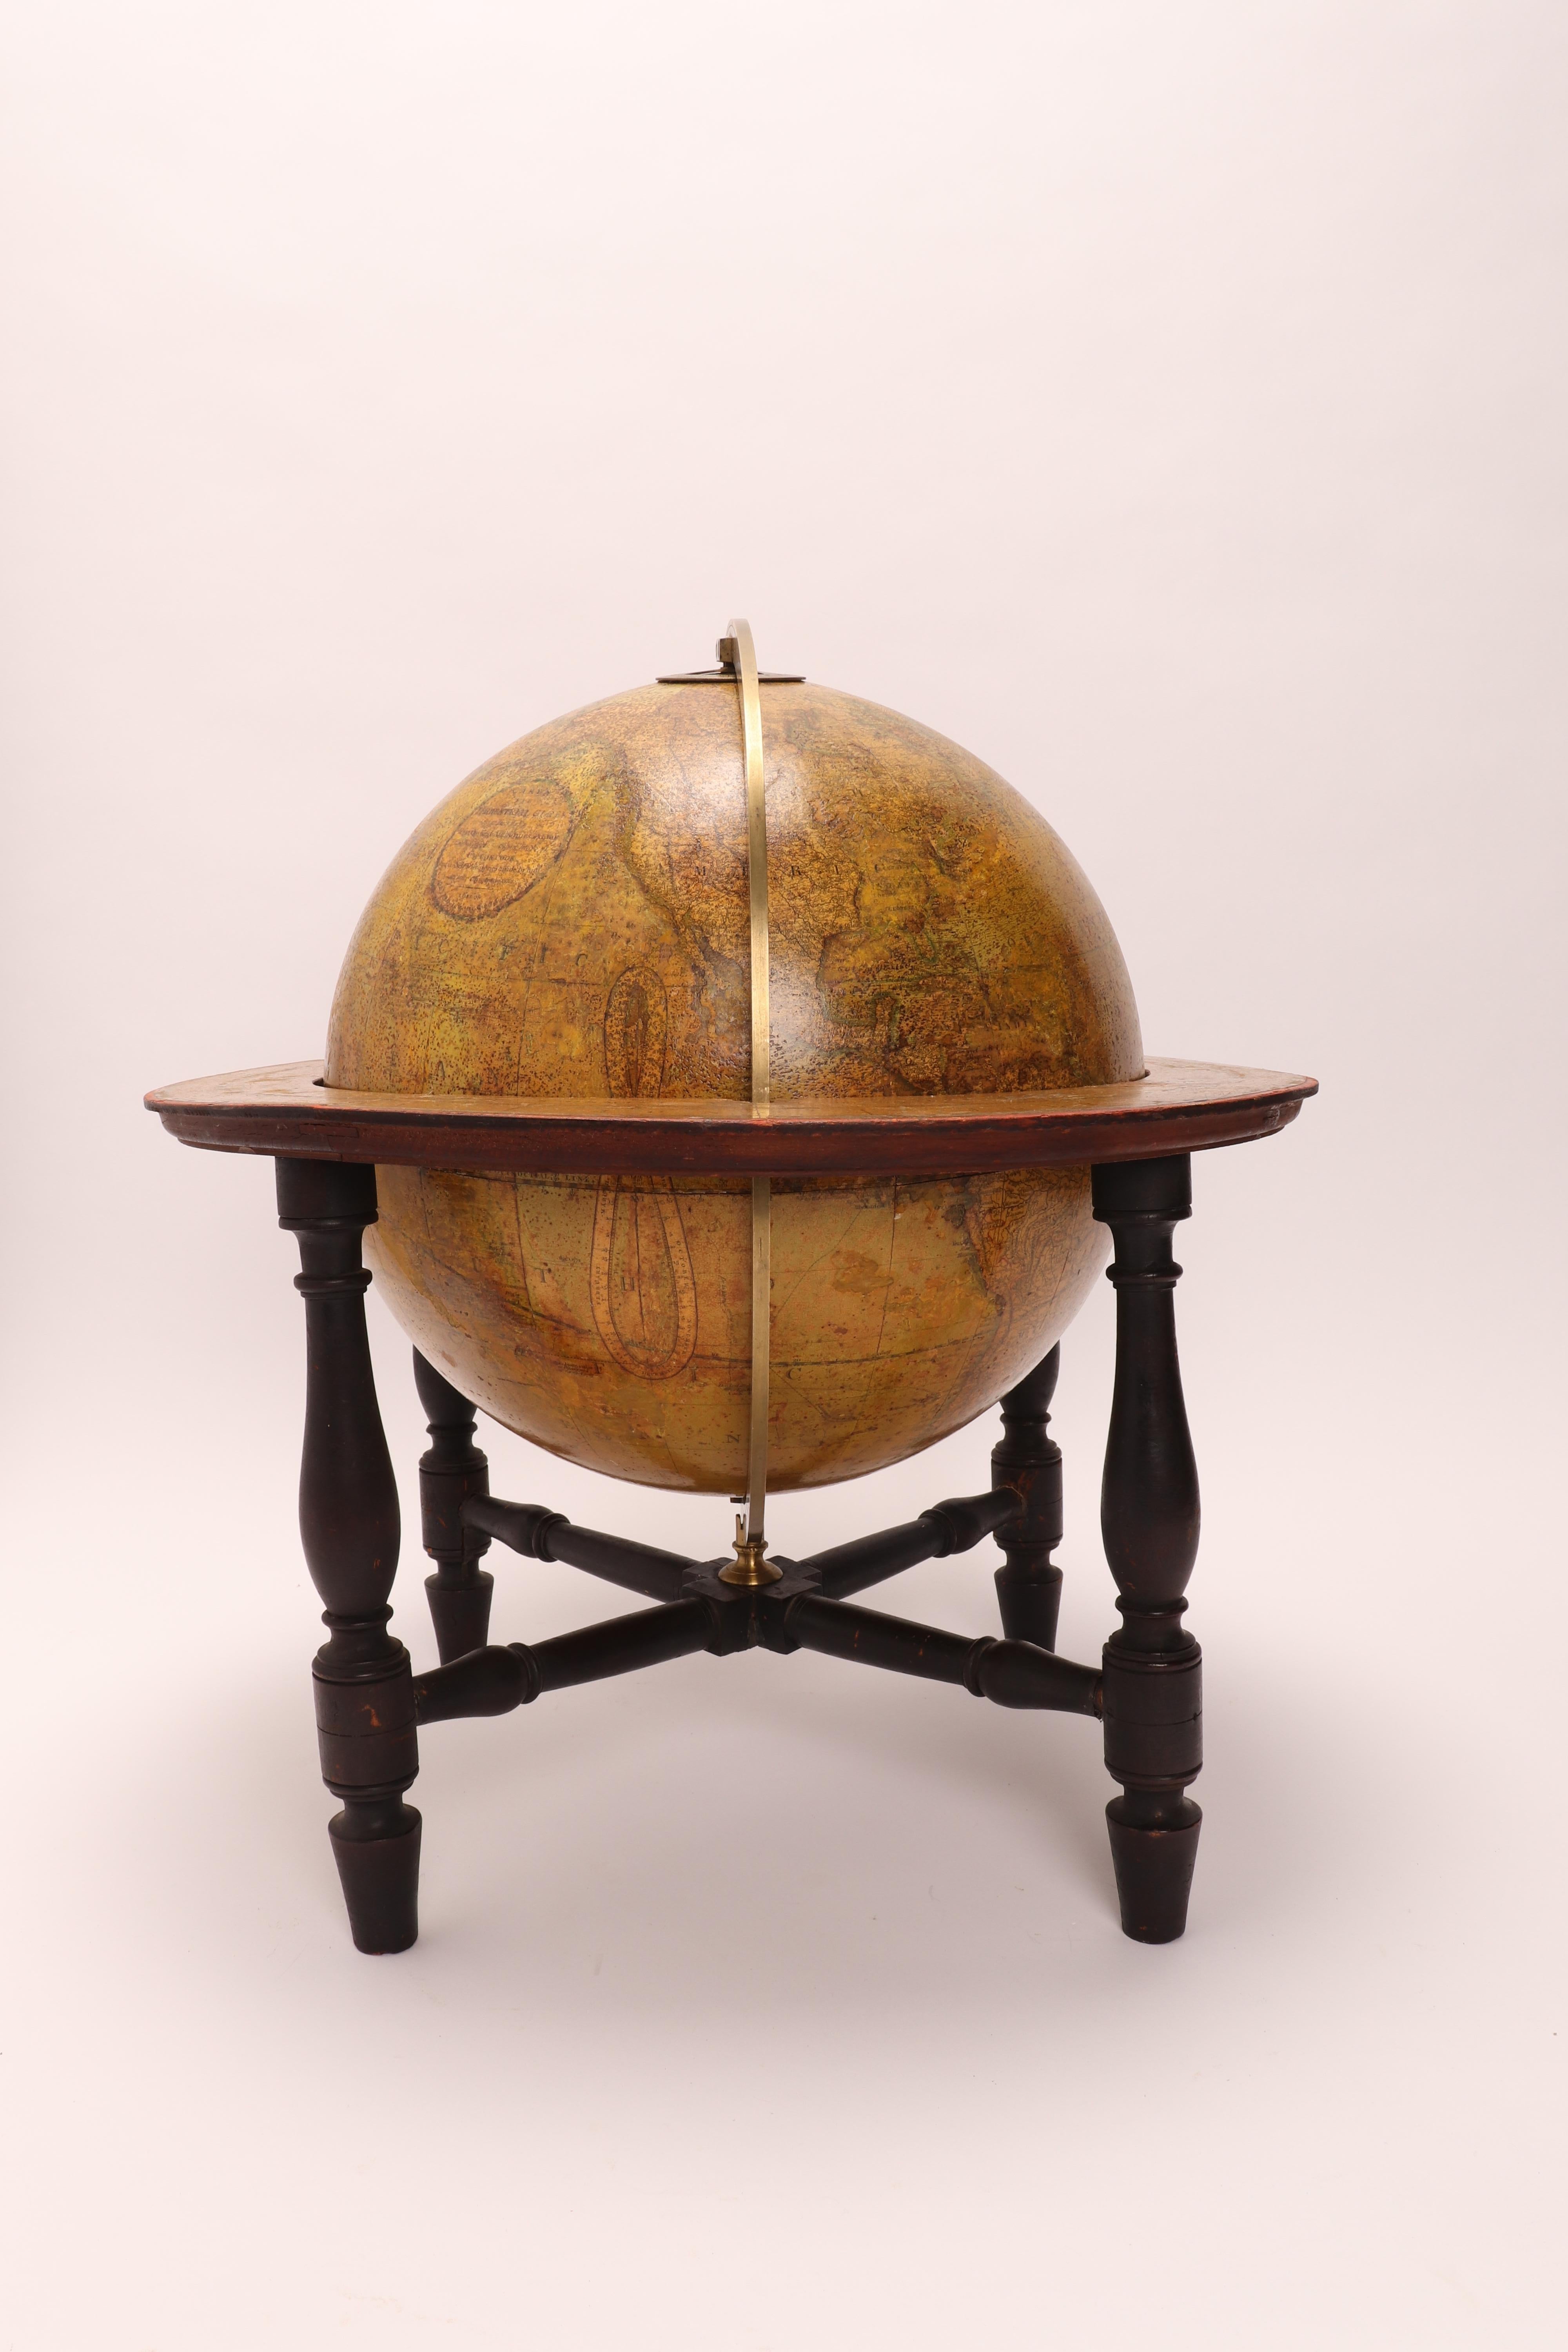 English Rare 12 inches terrestrial globe signed Cary, London United Kingdom 1800. For Sale